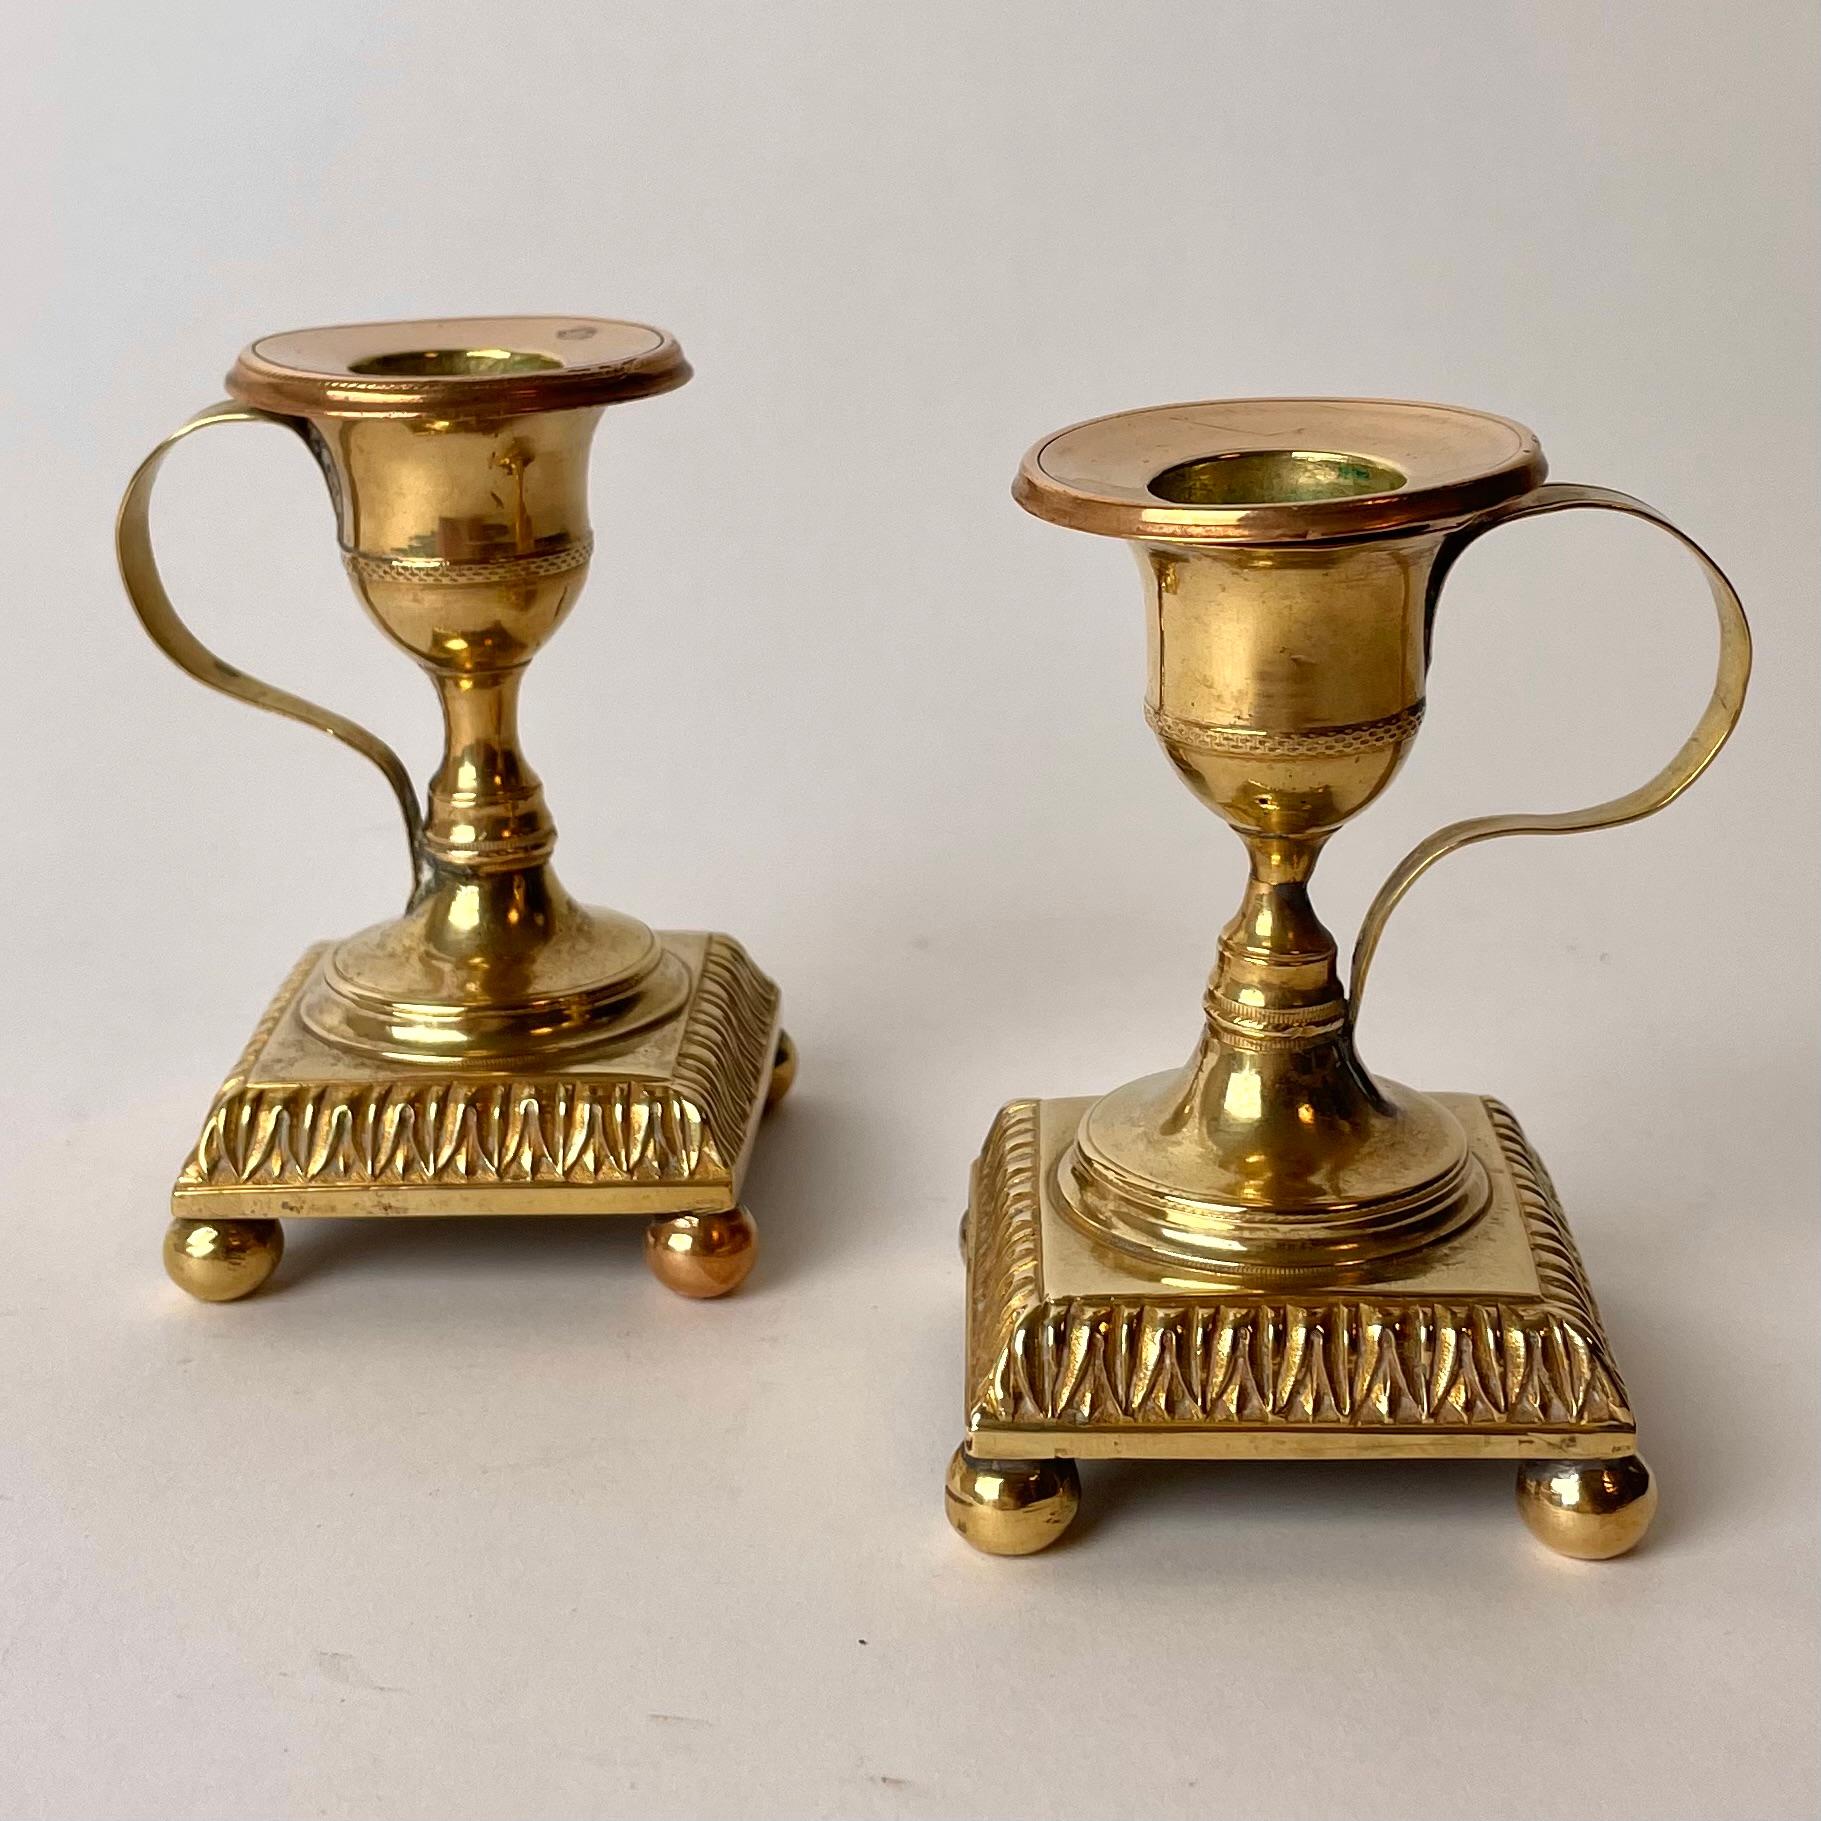 Swedish Small Pair of Gustavian Night Candlesticks from the, Late 18th Century For Sale